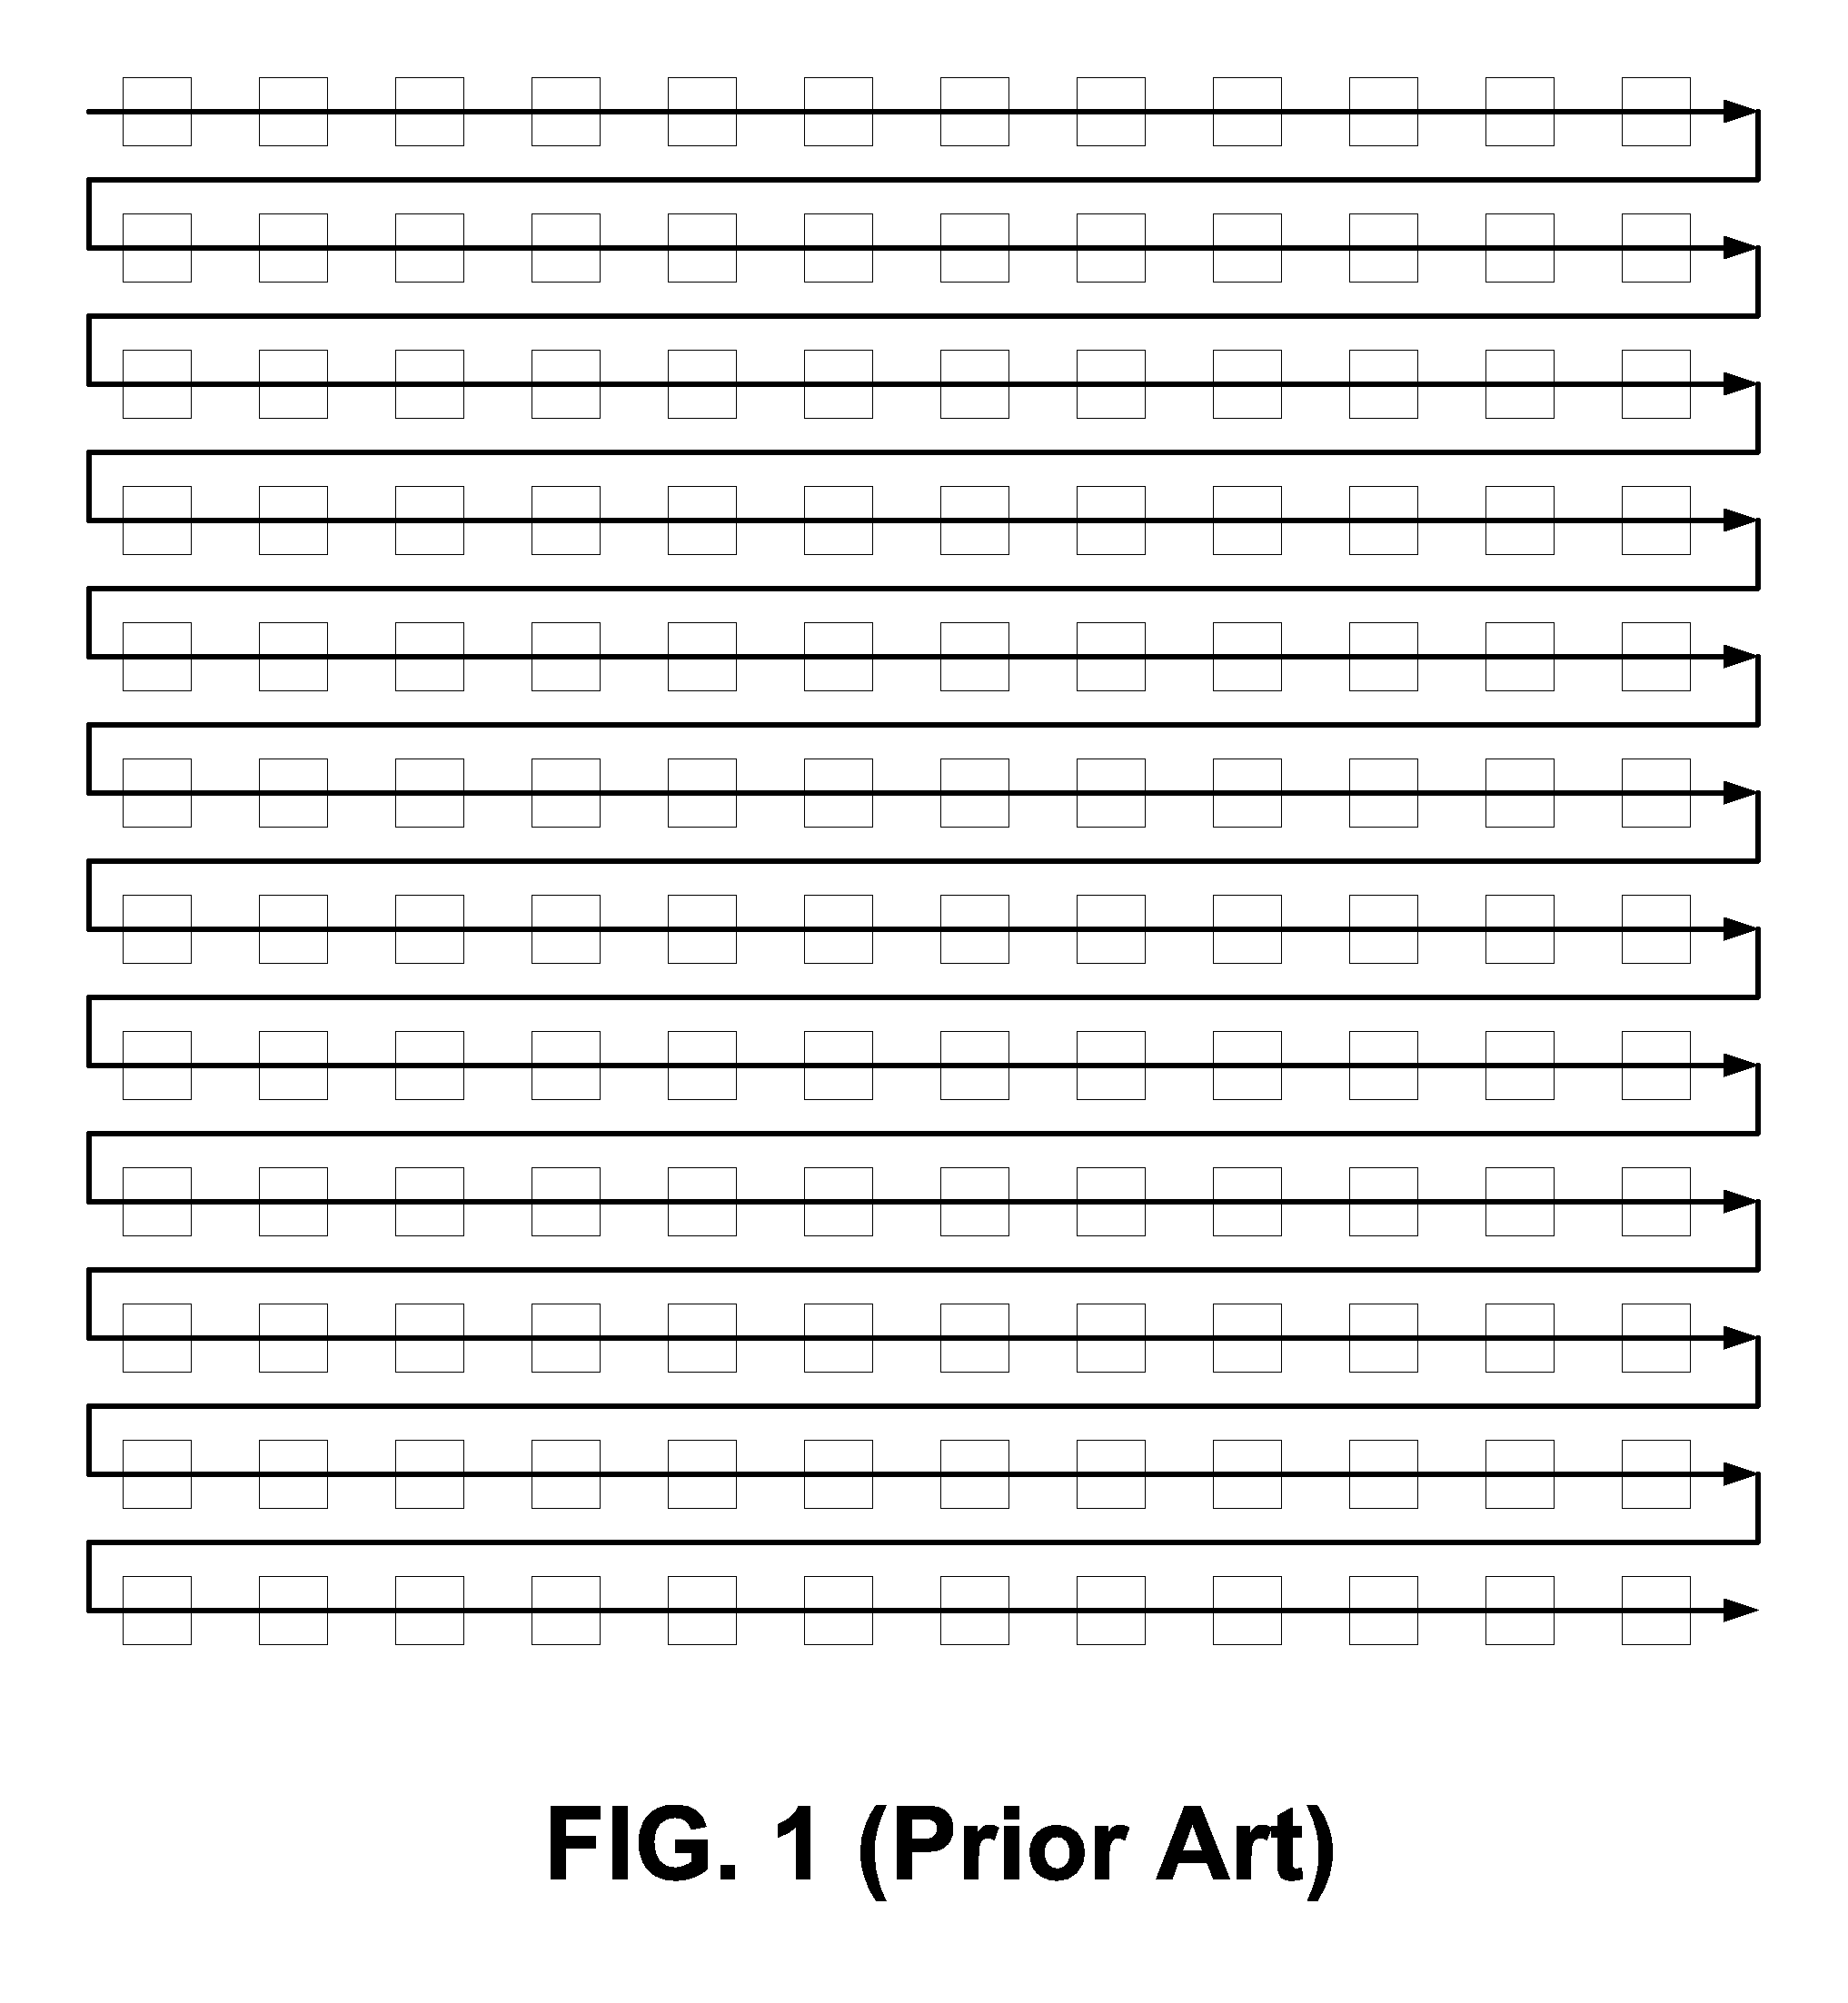 Systems and methods for raster-to-block converter